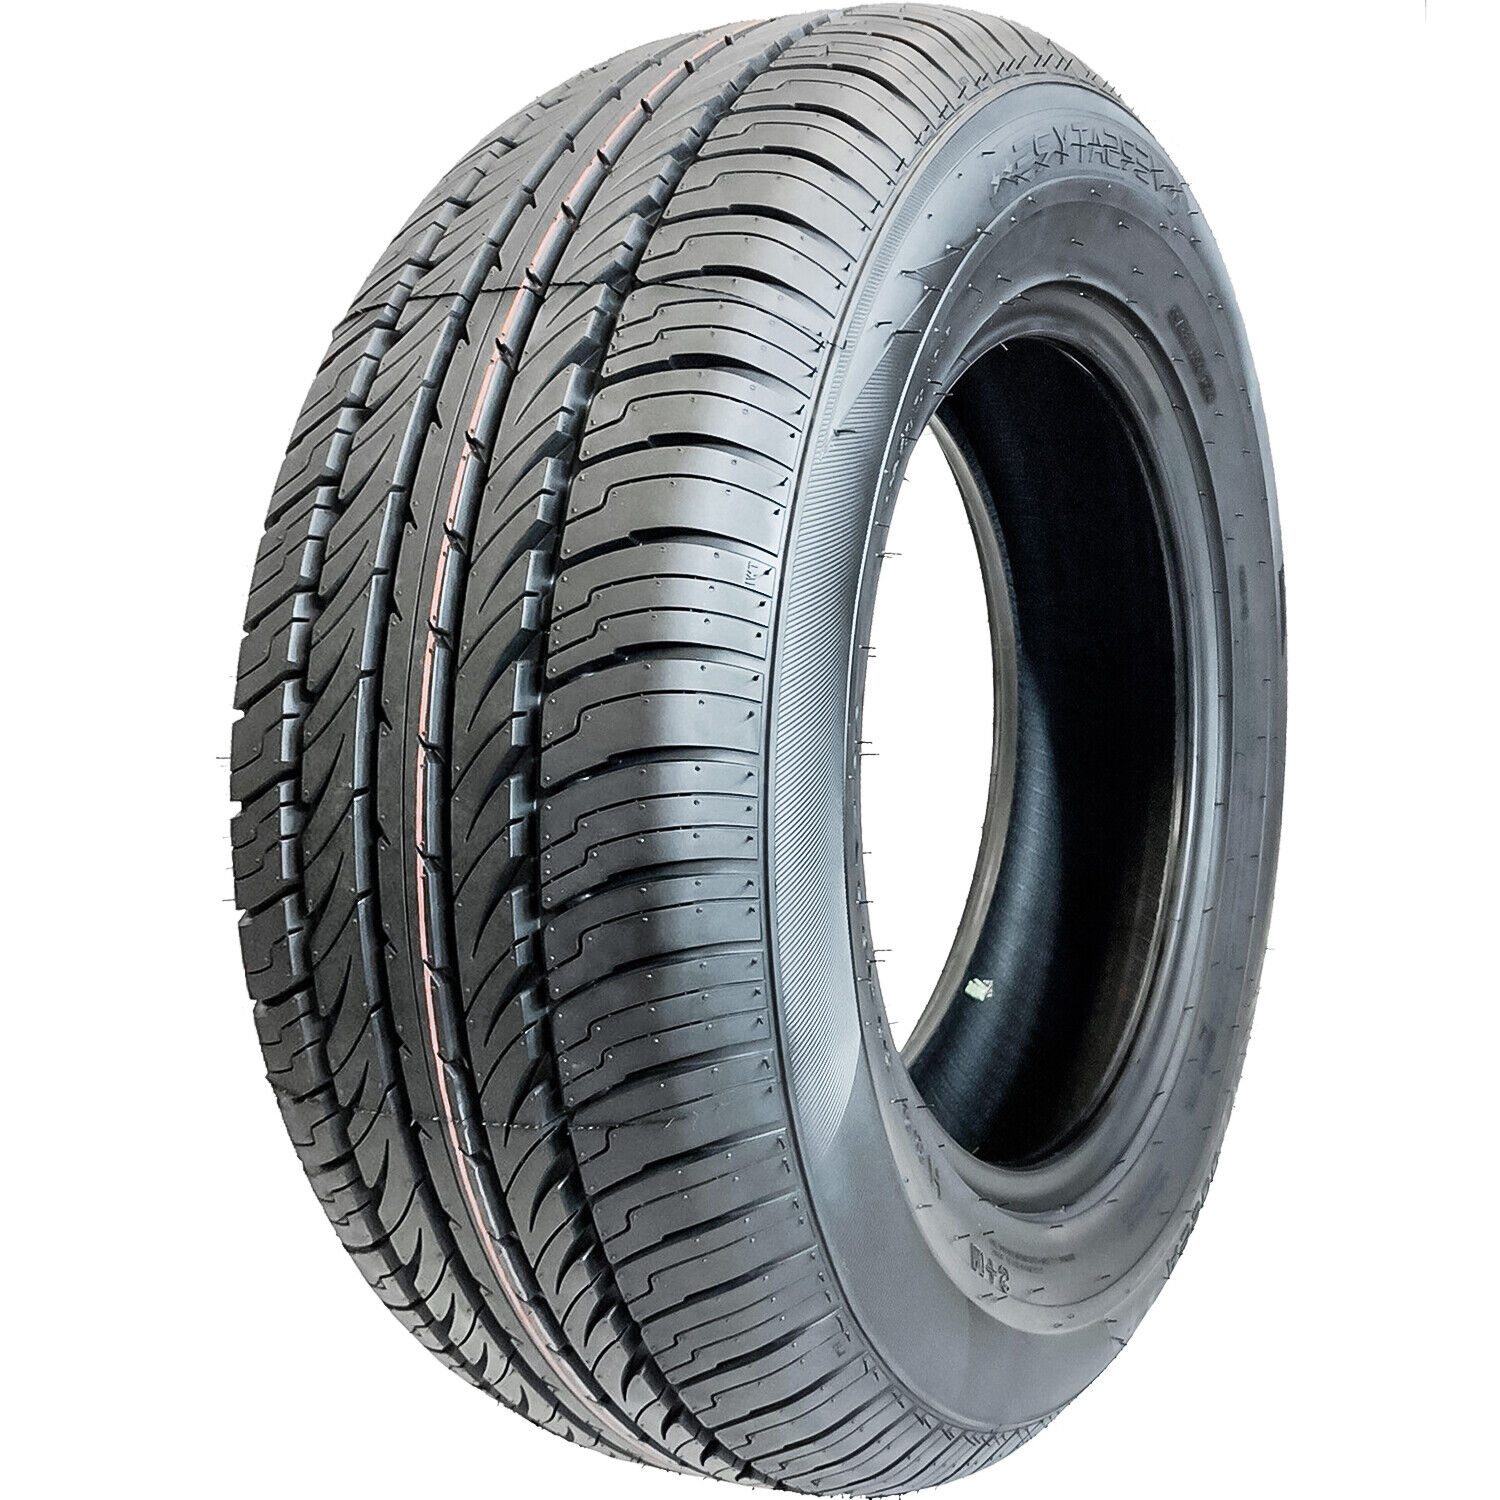 2 Tires Versatyre AS900+ 235/60R17 106H AS A/S Performance